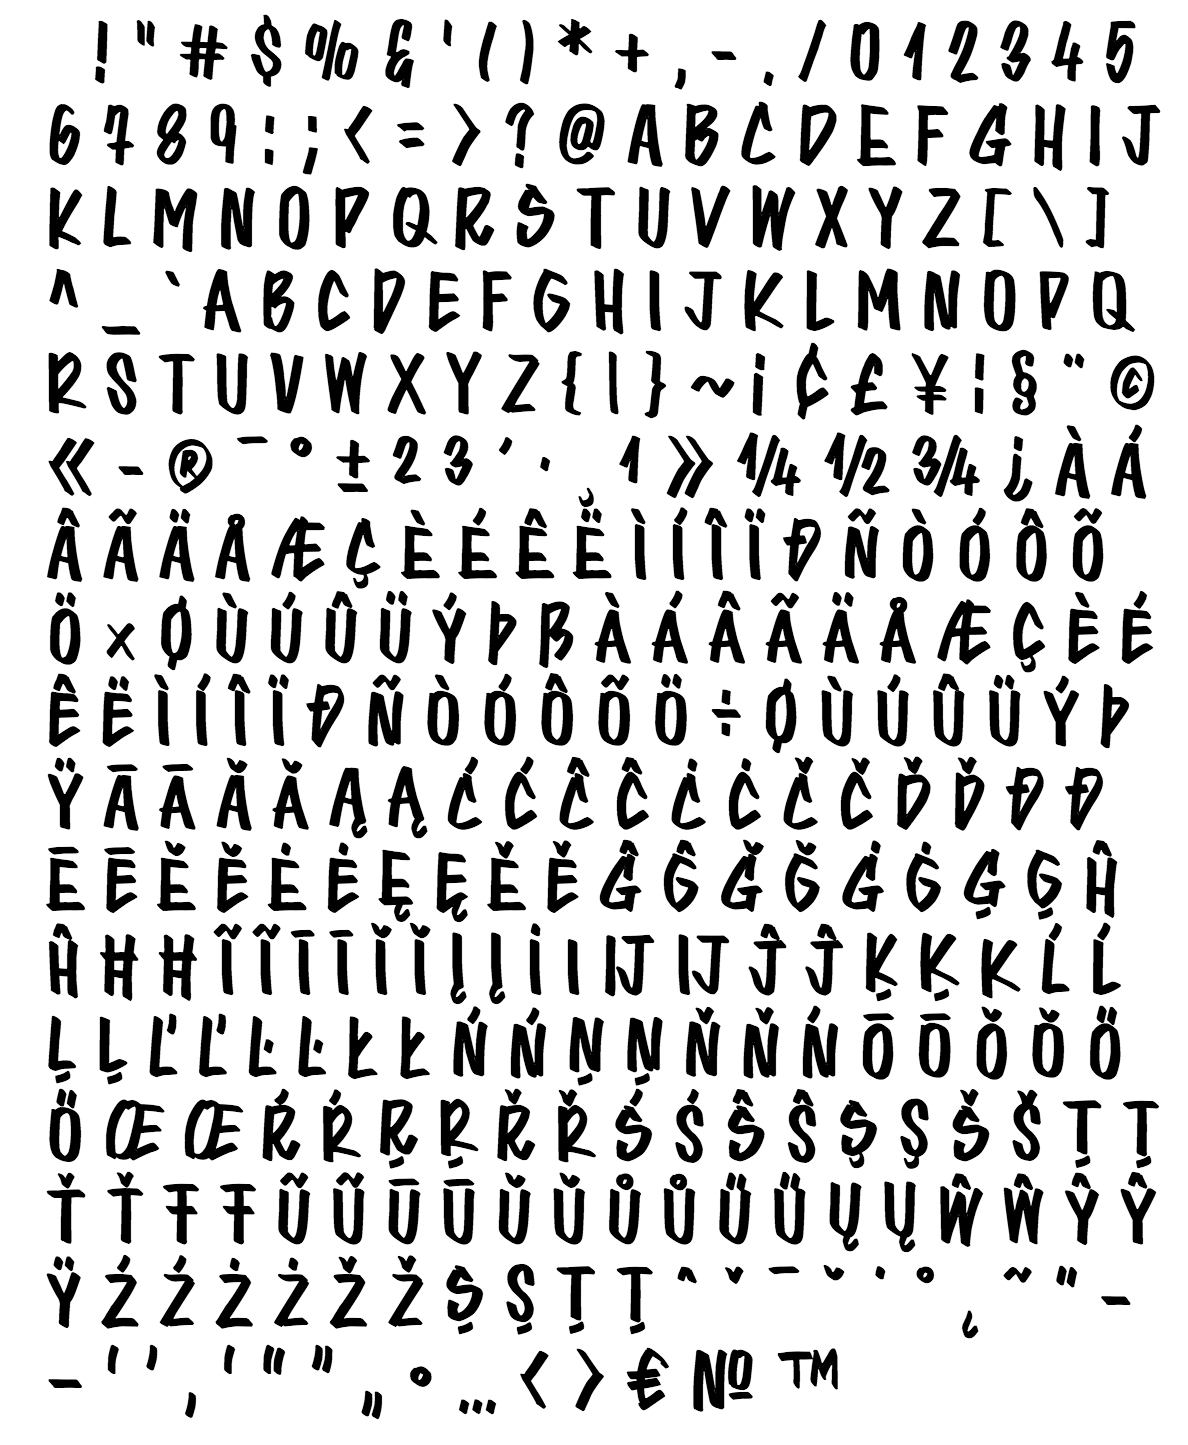 procent font - complete character list